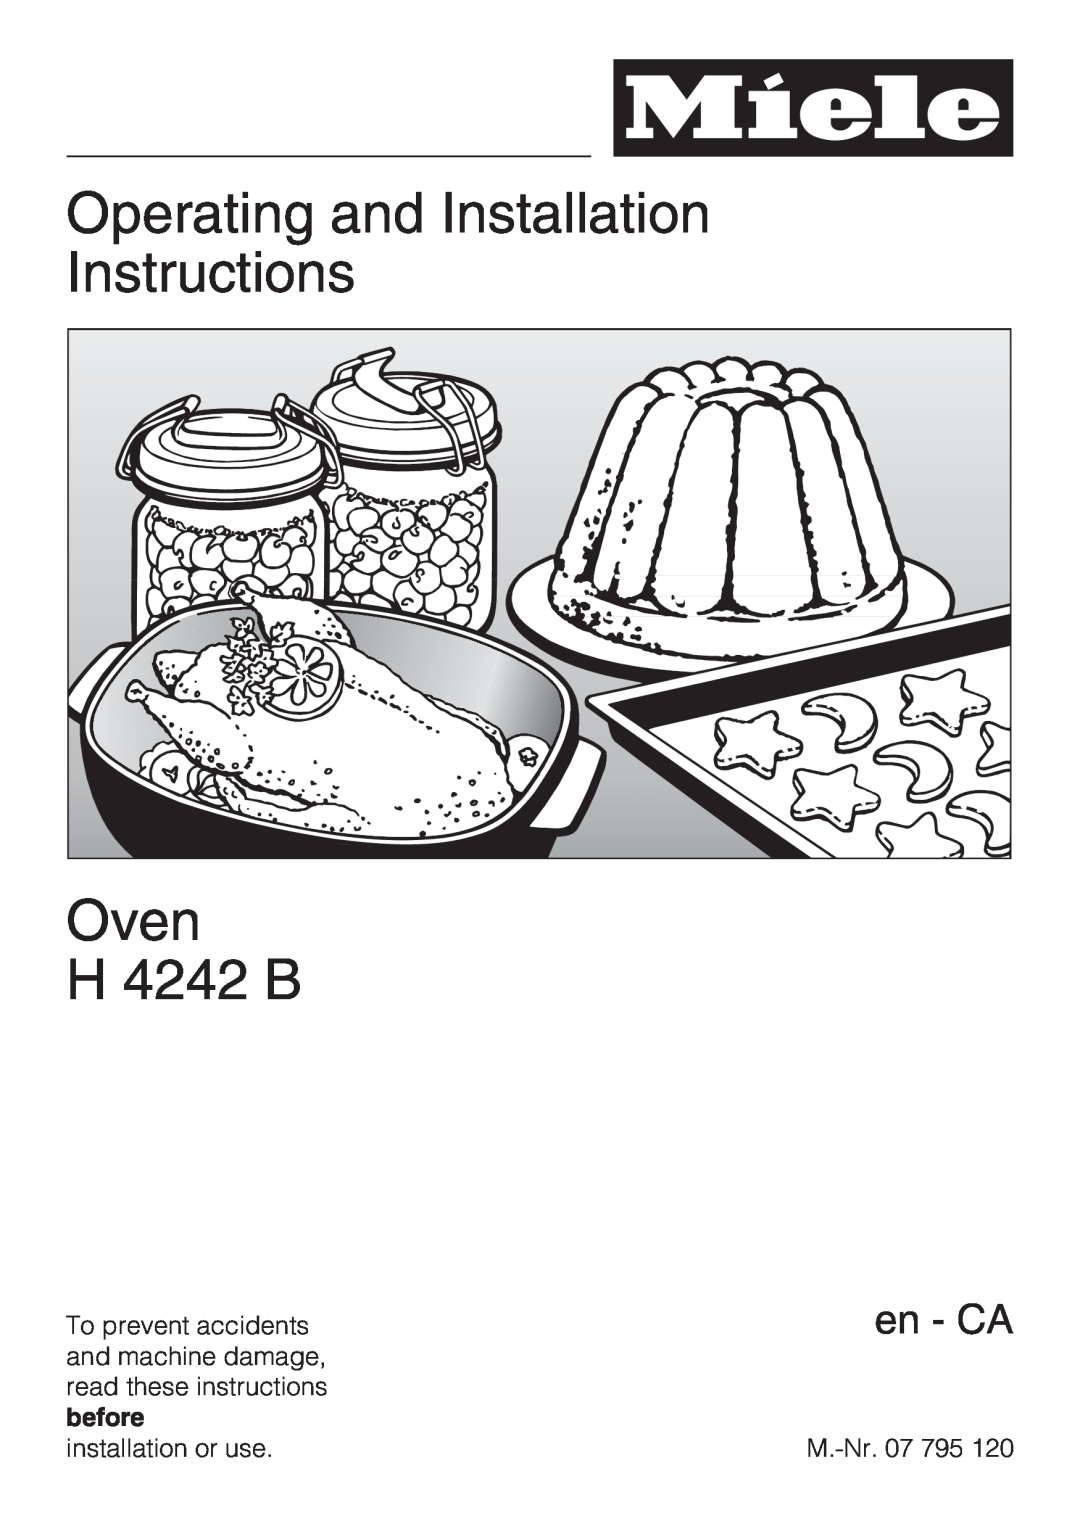 Miele H 4242 B installation instructions Operating and Installation Instructions, Oven, en - CA 